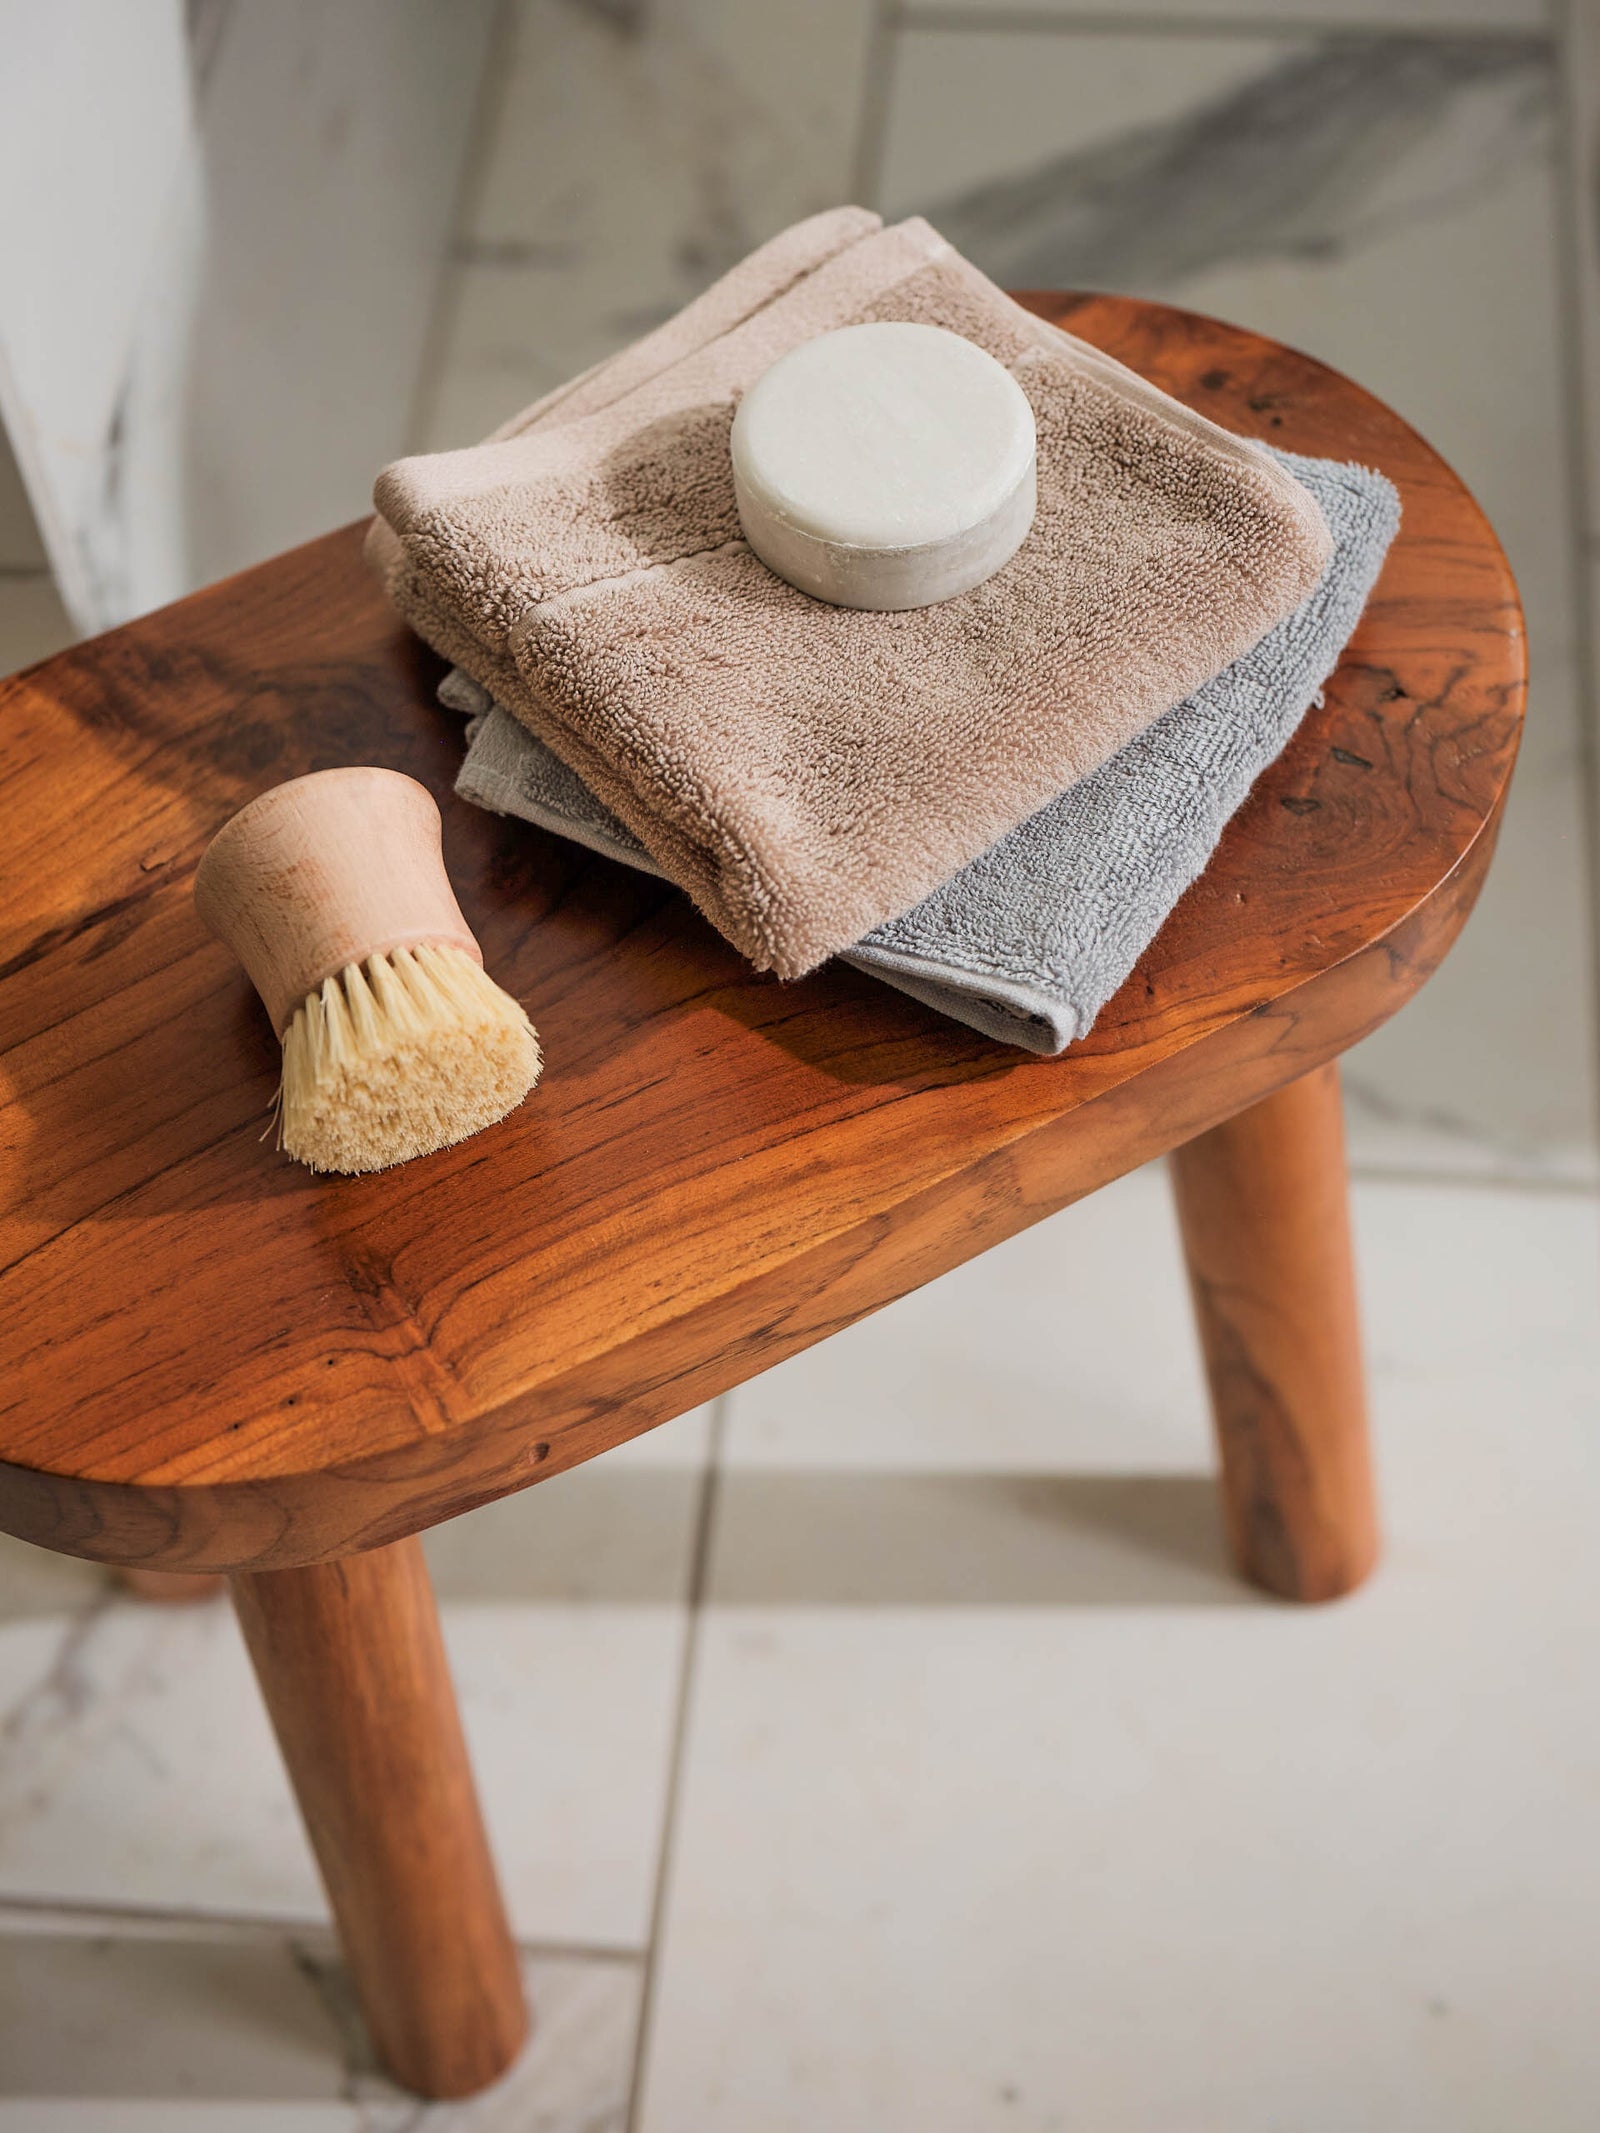 Premium Plush Hand Towels in the color Sand and Harbor Mist. Photo of Sand and Harbor Mist Premium Plush Hand Towels taken resting on a stool in a bathroom with marble tile.